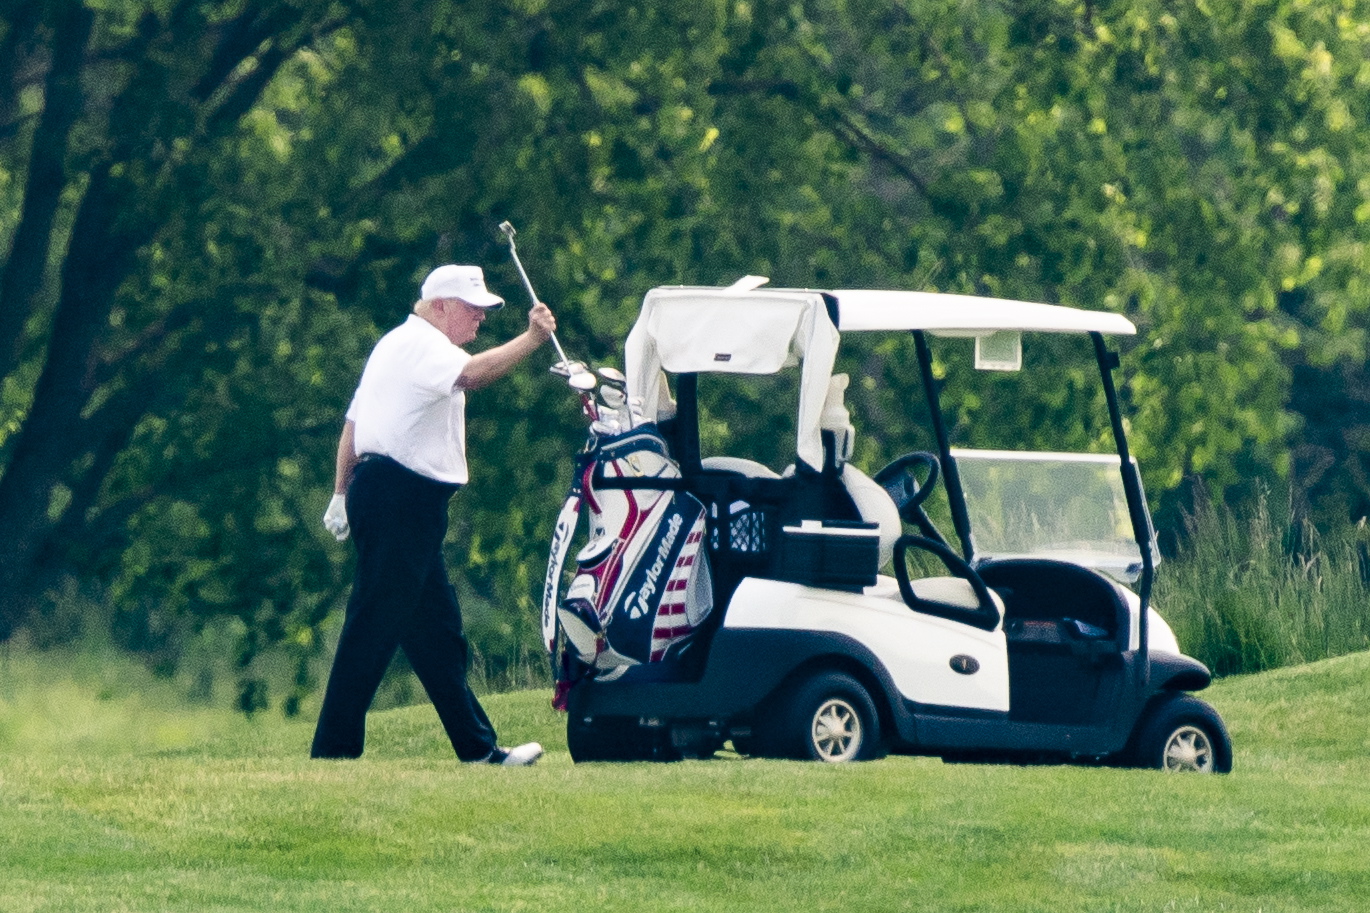 epa08440052 US President Donald J. Trump, wearing a white hat and white Polo shirt, plays golf at the Trump National Golf Club in Sterling, Virginia, USA, 23 May 2020. It is the first time the president has played golf since the lockdown over the coronavirus COVID-19 pandemic.  EPA/JIM LO SCALZO